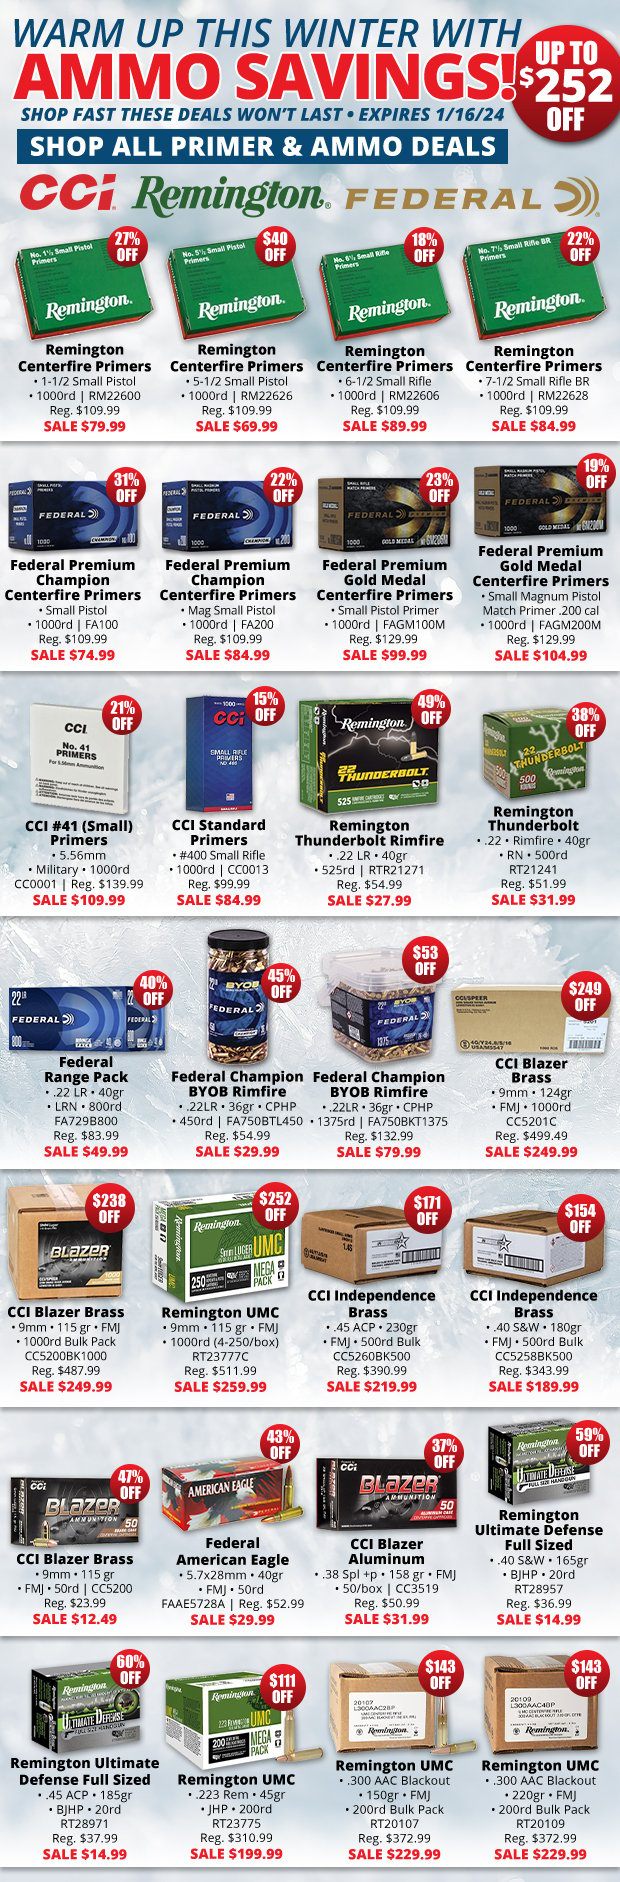 Up to $252 in Ammo Savings!